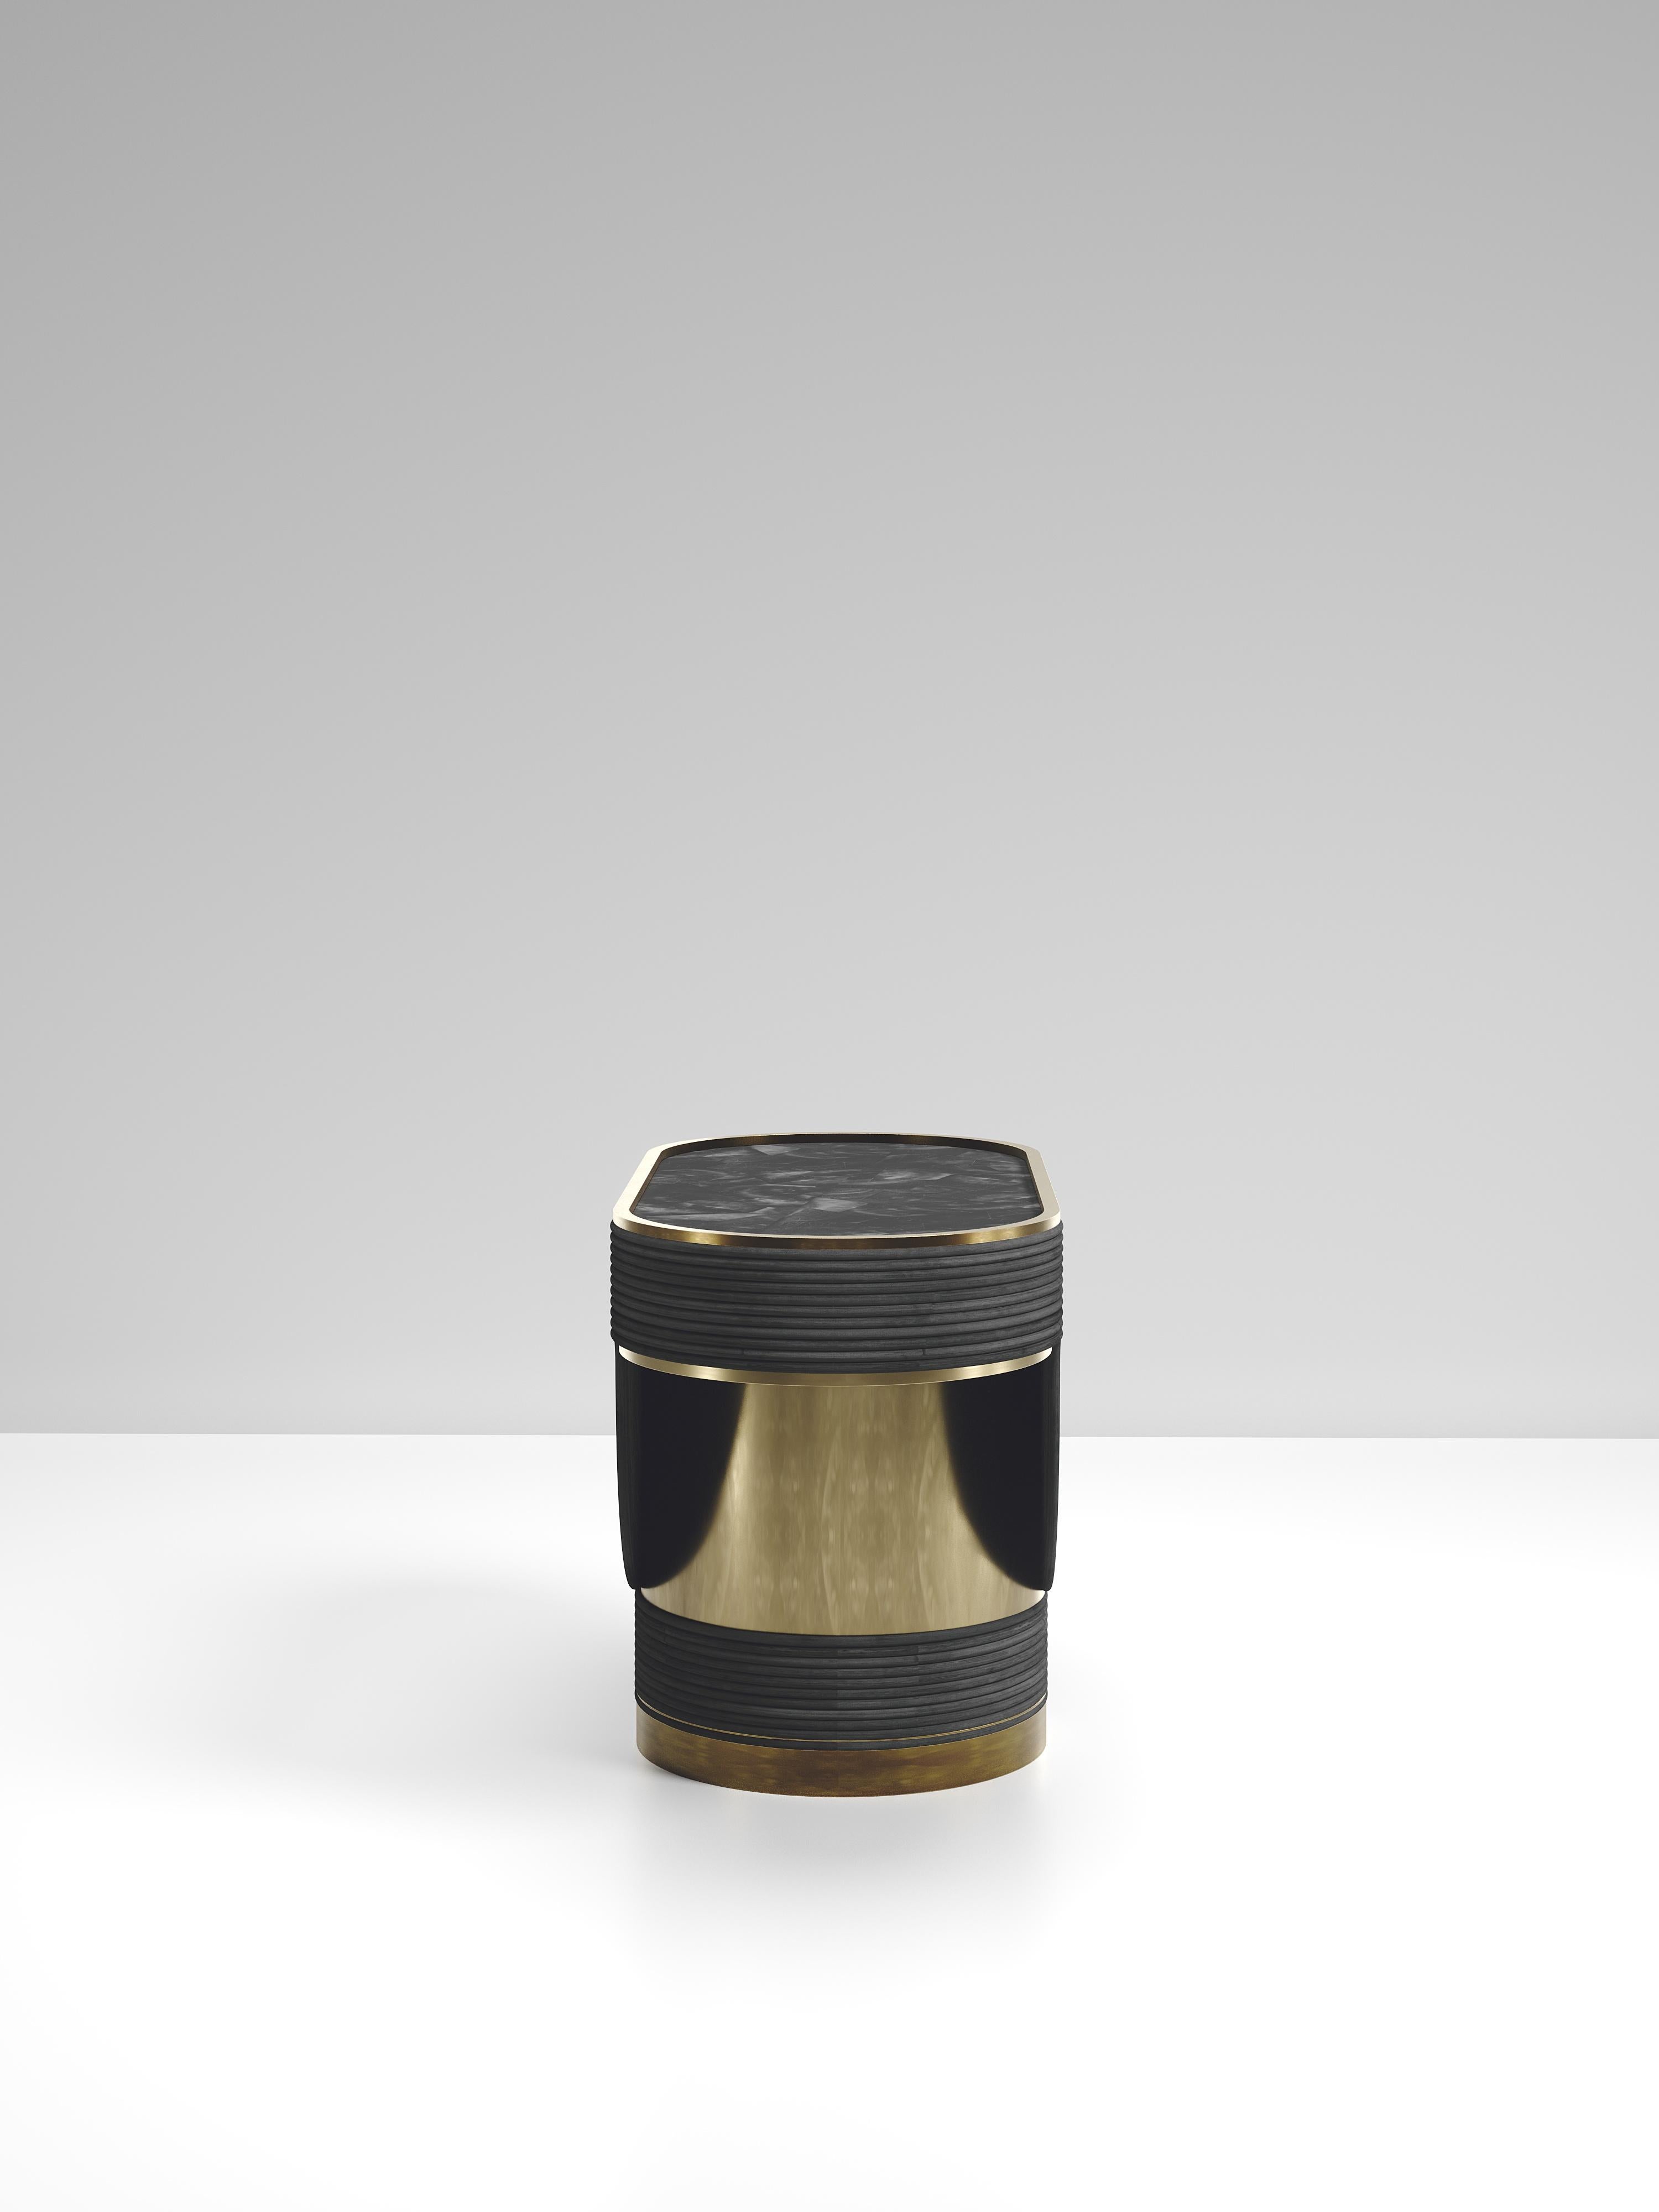 The Licol Side table by R & Y Augousti is a part of their new Rattan capsule launch. The piece explores the brand's iconic DNA of bringing old world artisanal craft into a contemporary and utterly luxury feel. This table is done in a black rattan